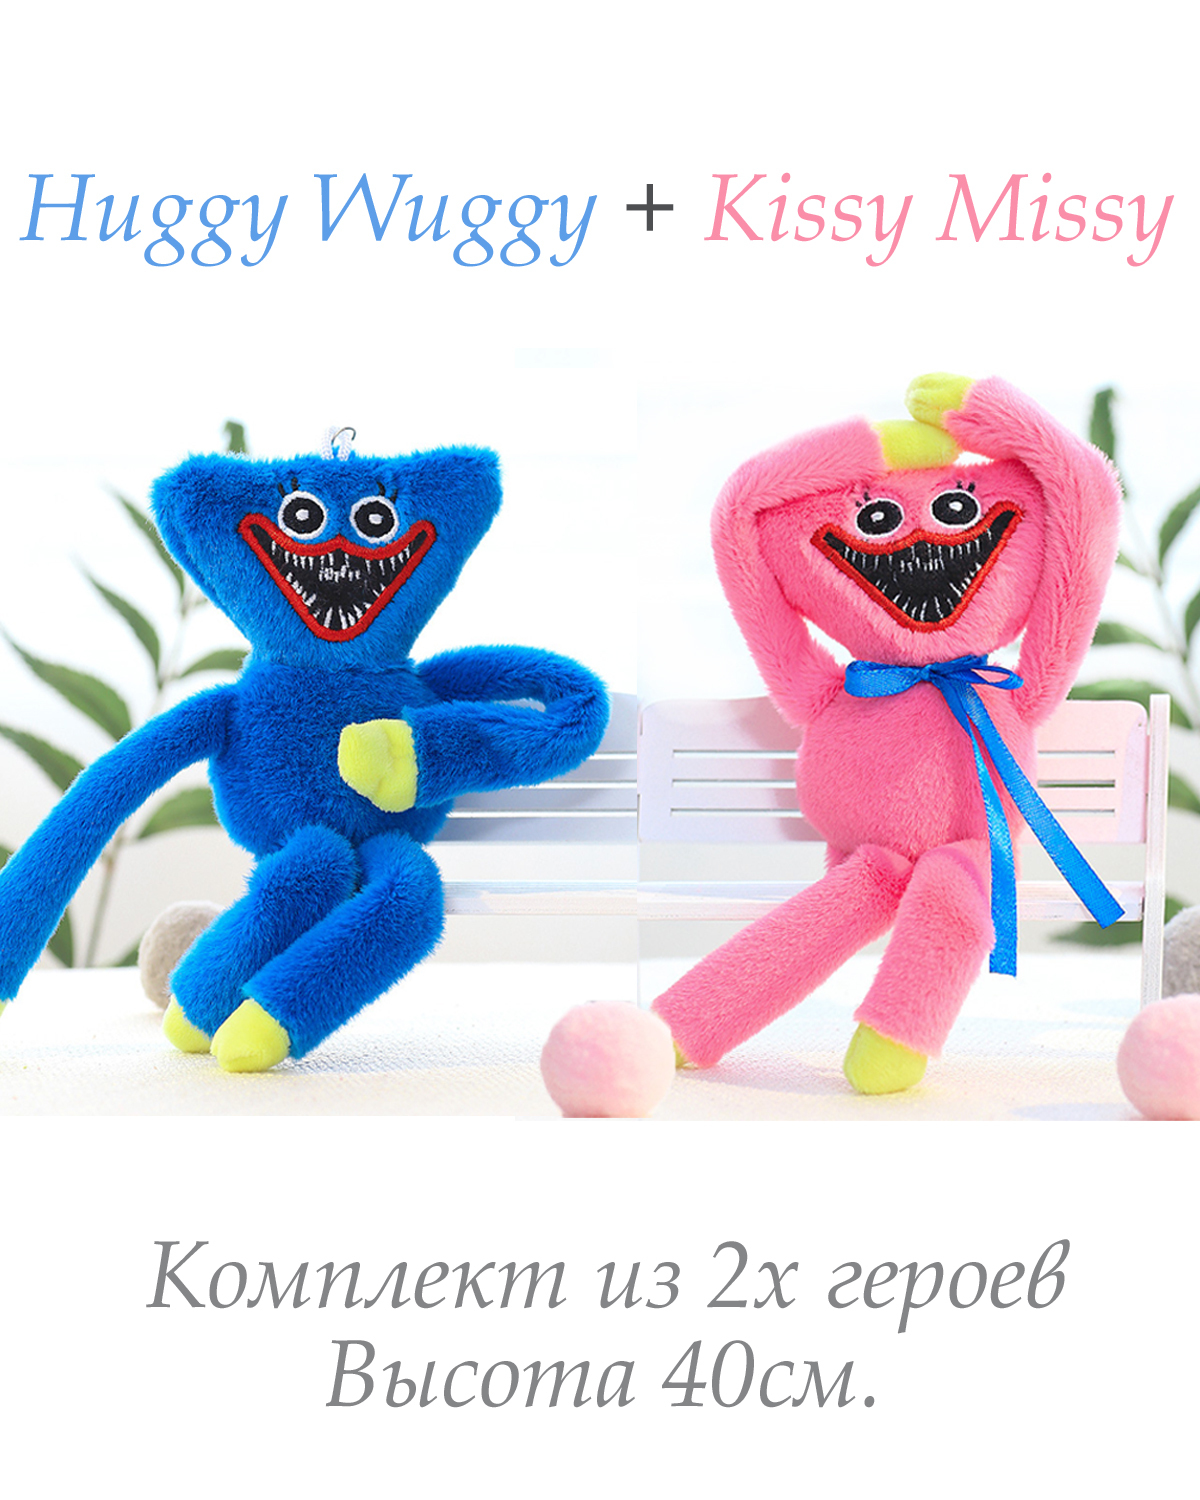 Huggy wuggy and kissy missy porn